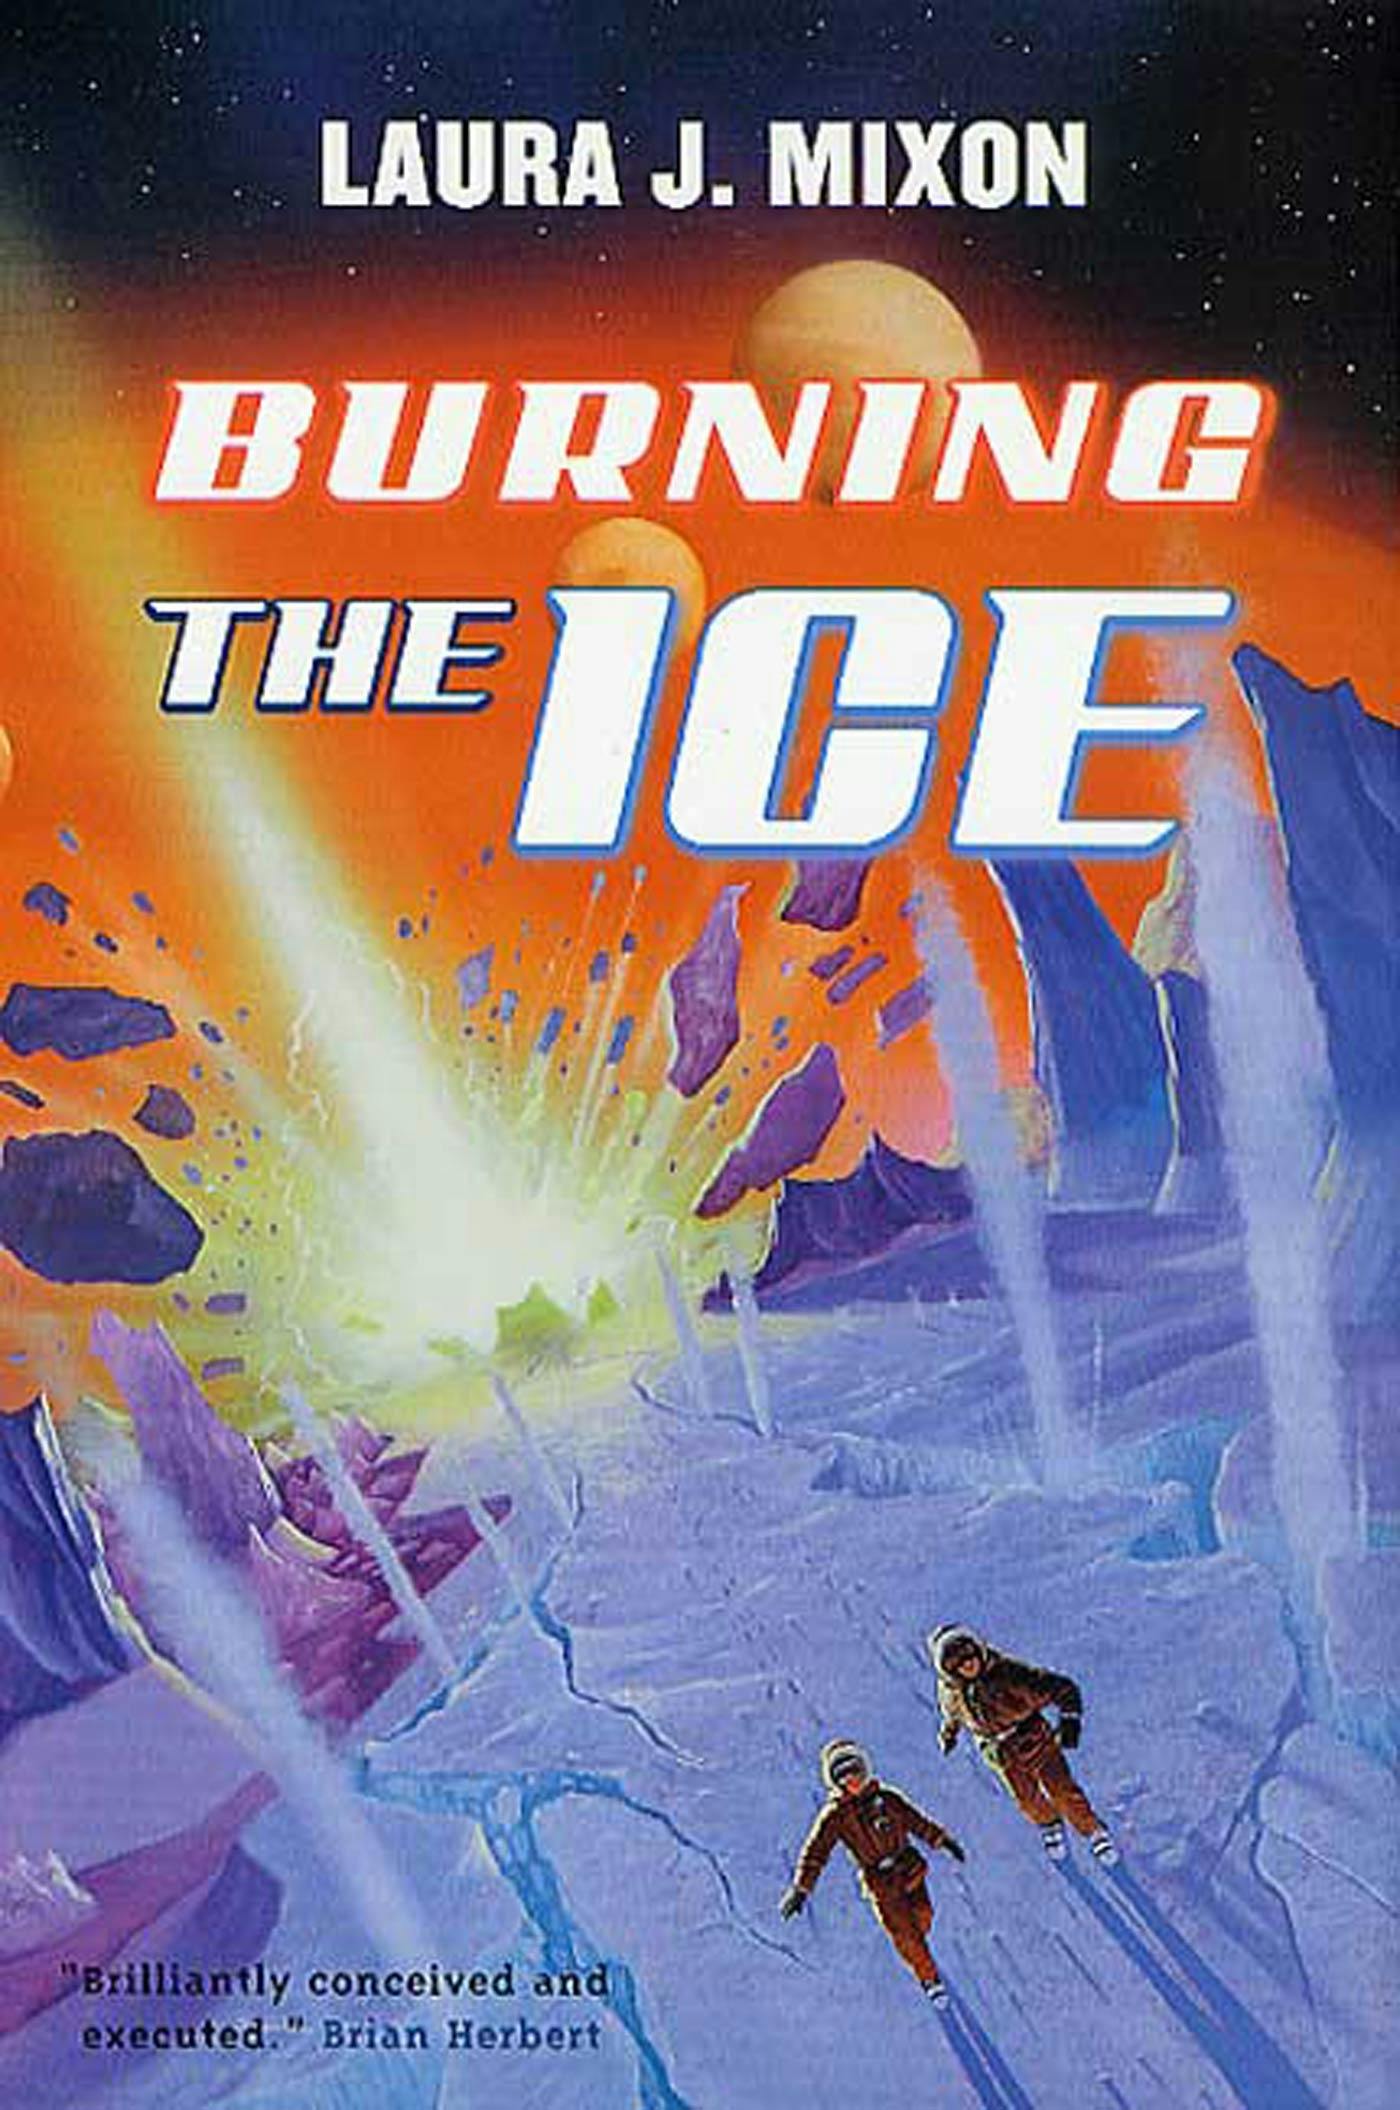 Cover for the book titled as: Burning the Ice